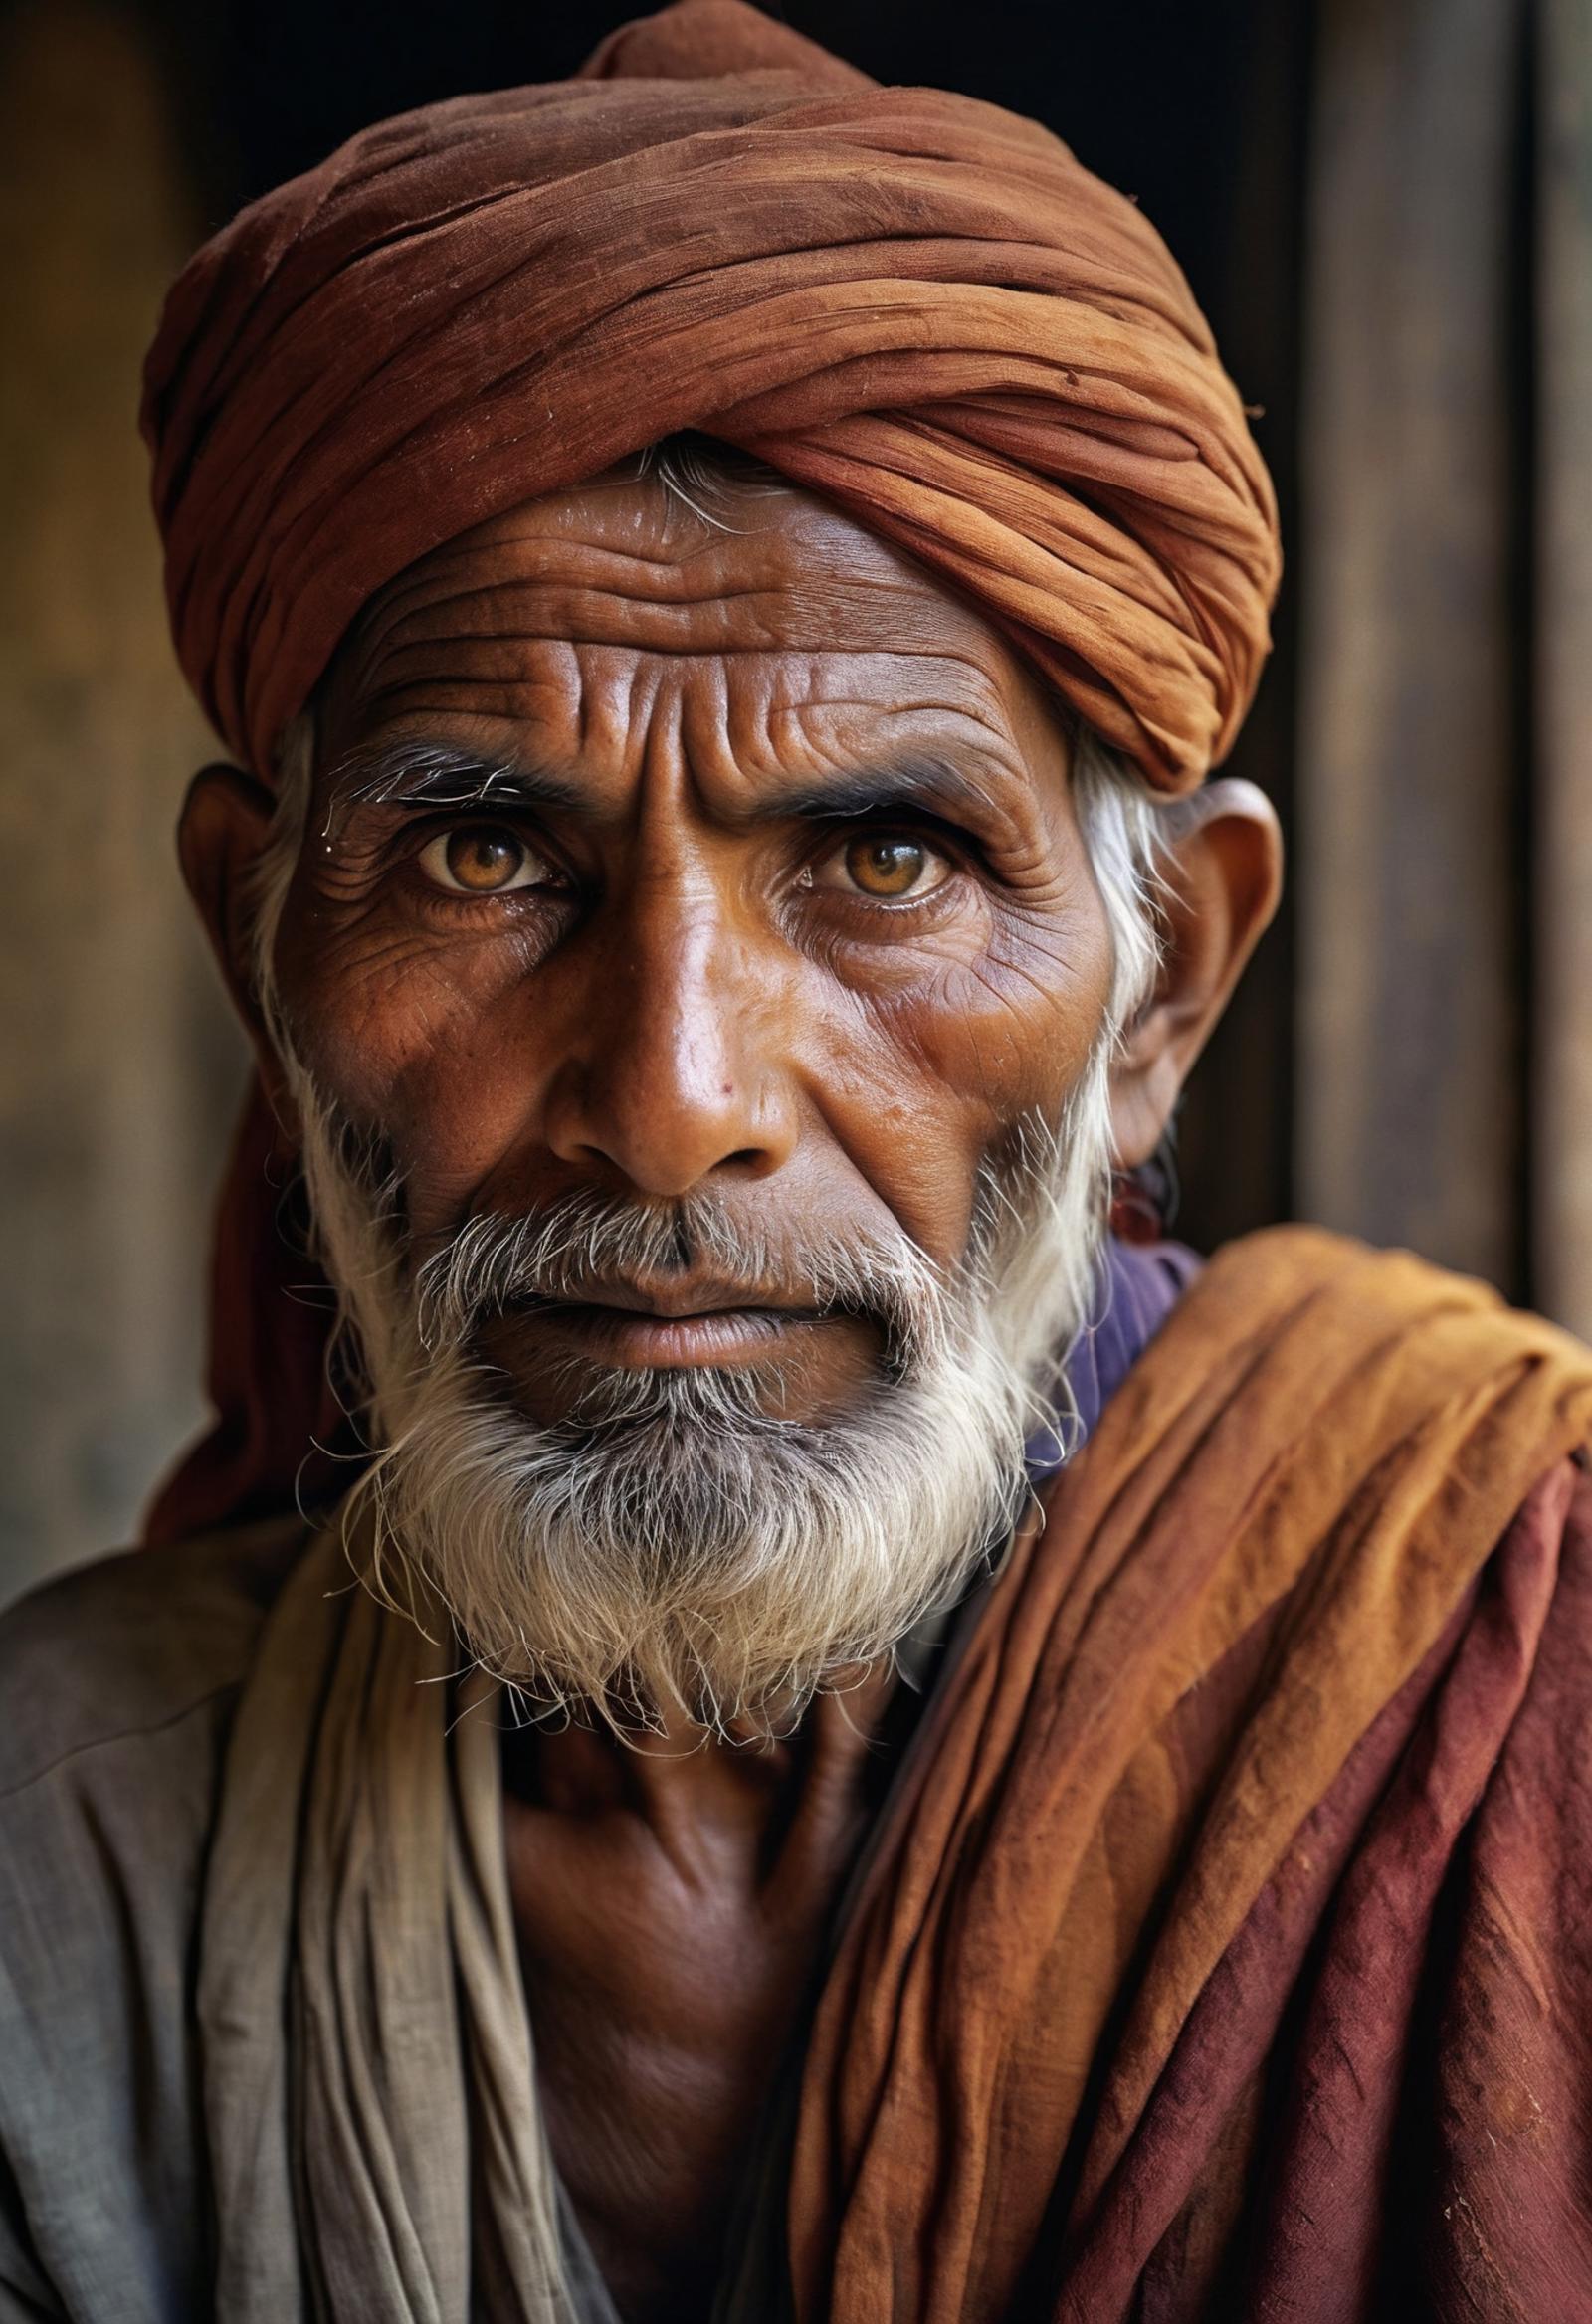 Older man with a red turban and a scruffy beard looking at the camera.